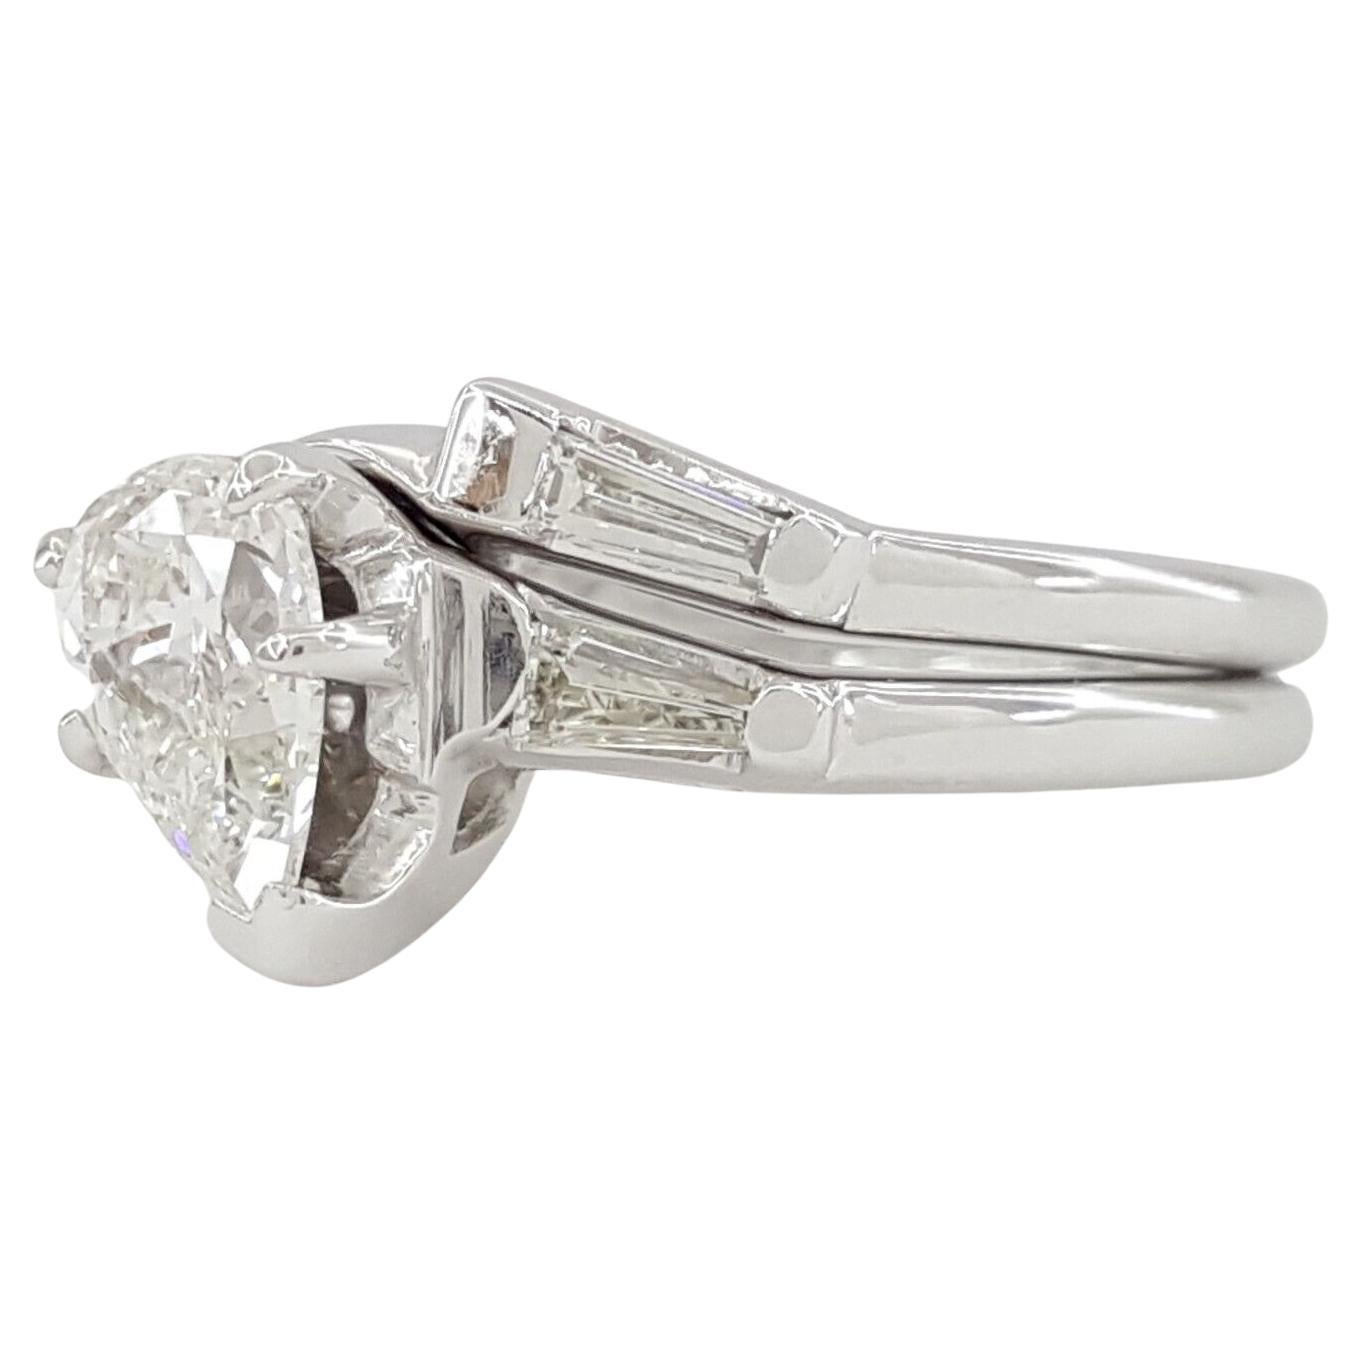 A 14k white gold engagement ring and wedding band set features a pear-cut diamond as the centerpiece. The rings, weighing a total of 3.8 grams and sized at 3 (with the ability to be resized to a larger size), showcase a natural pear brilliant-cut